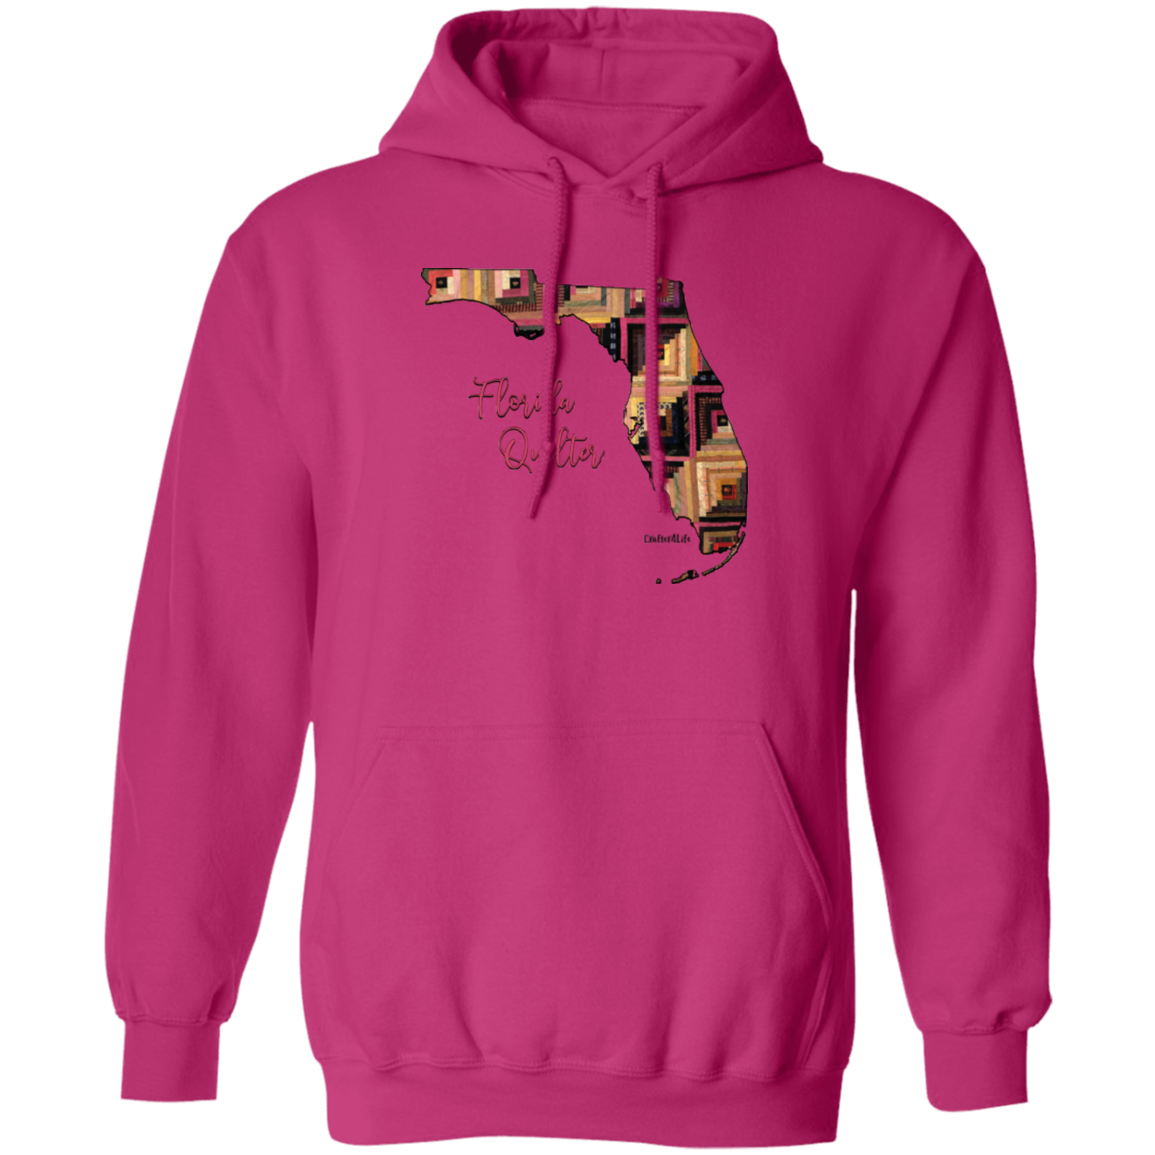 Florida Quilter Pullover Hoodie, Gift for Quilting Friends and Family